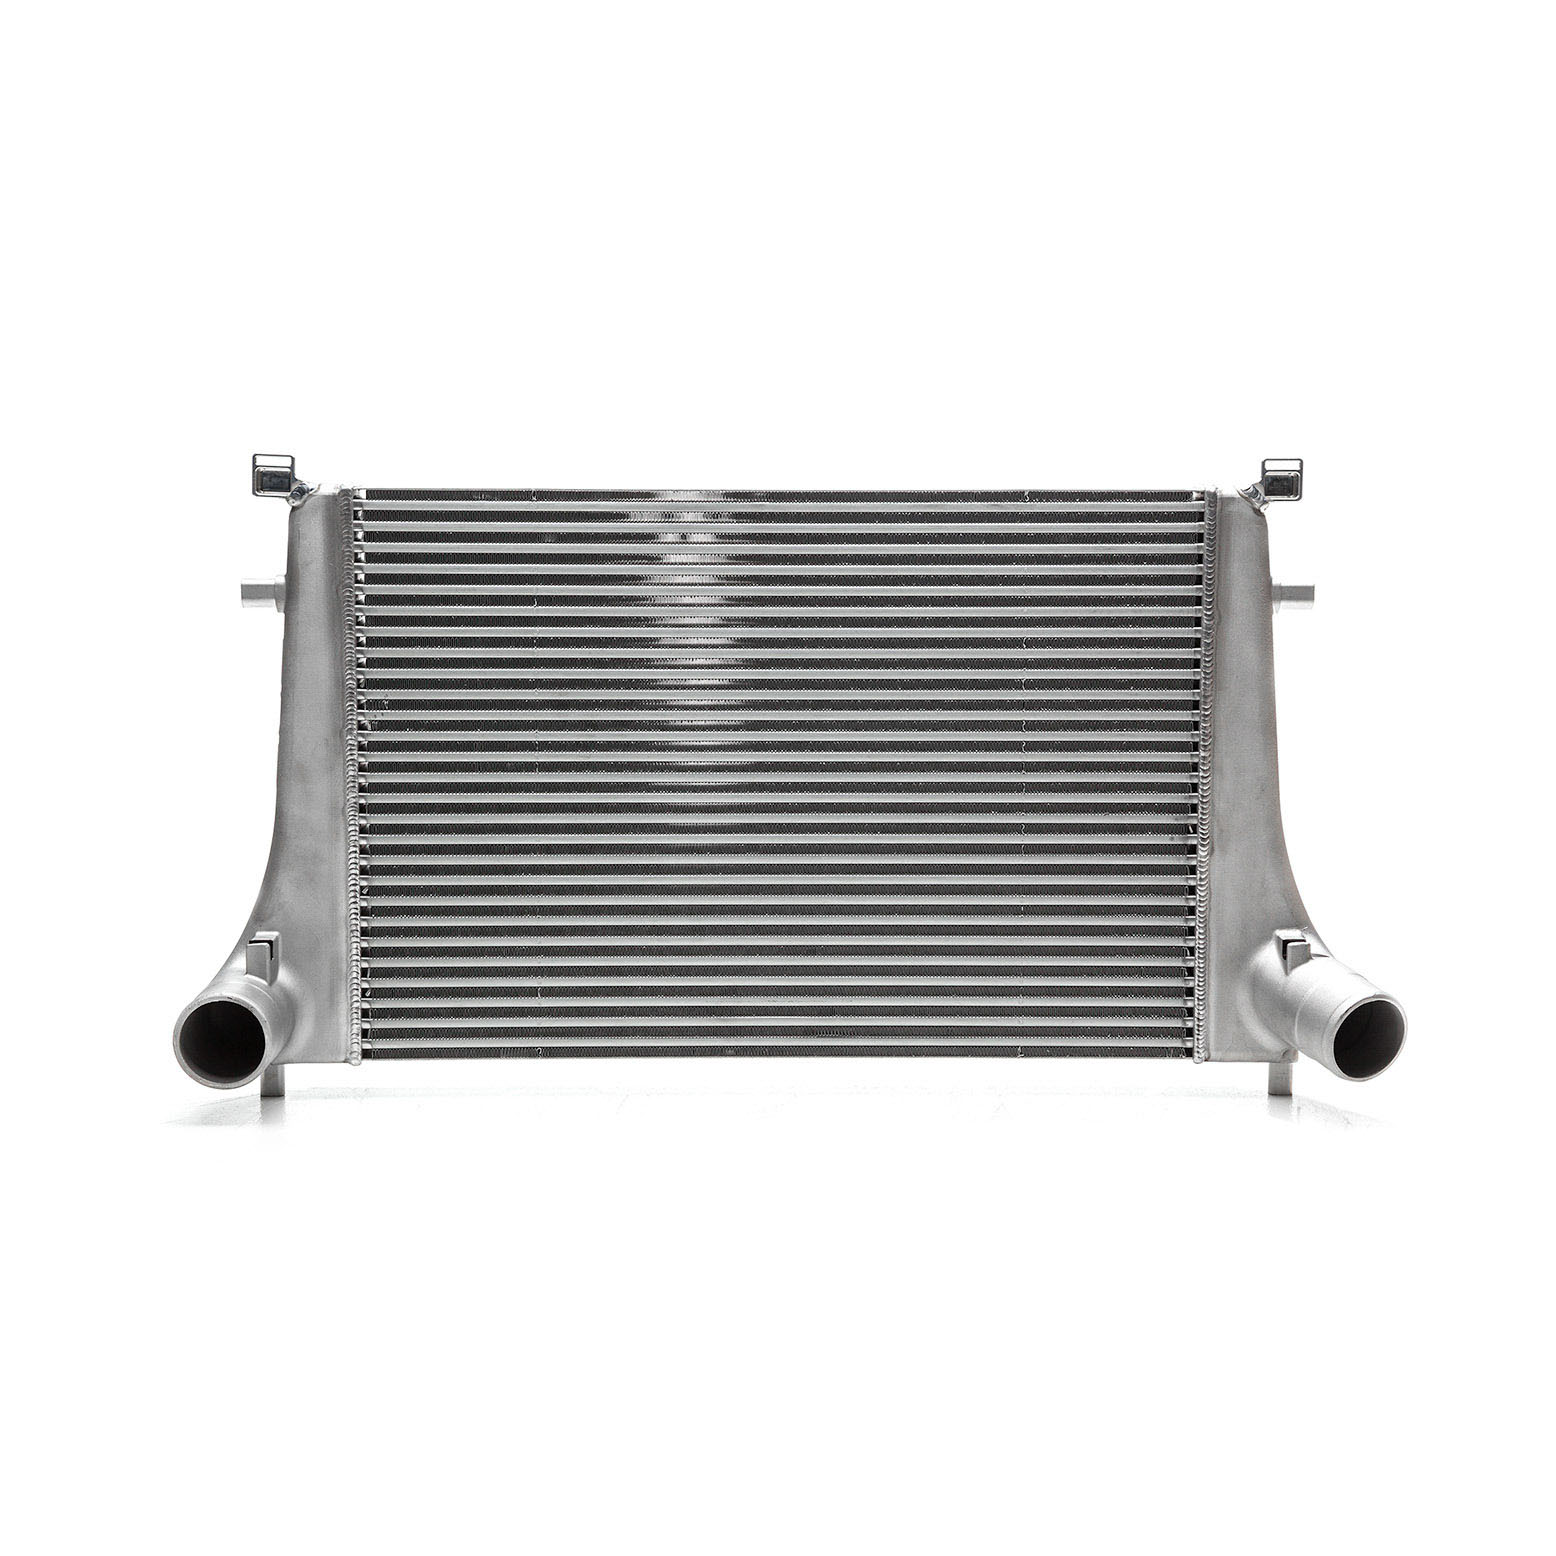 AMS Performance Front Mount Intercooler for VW GTI, Golf R, GLI, Audi S3, A3